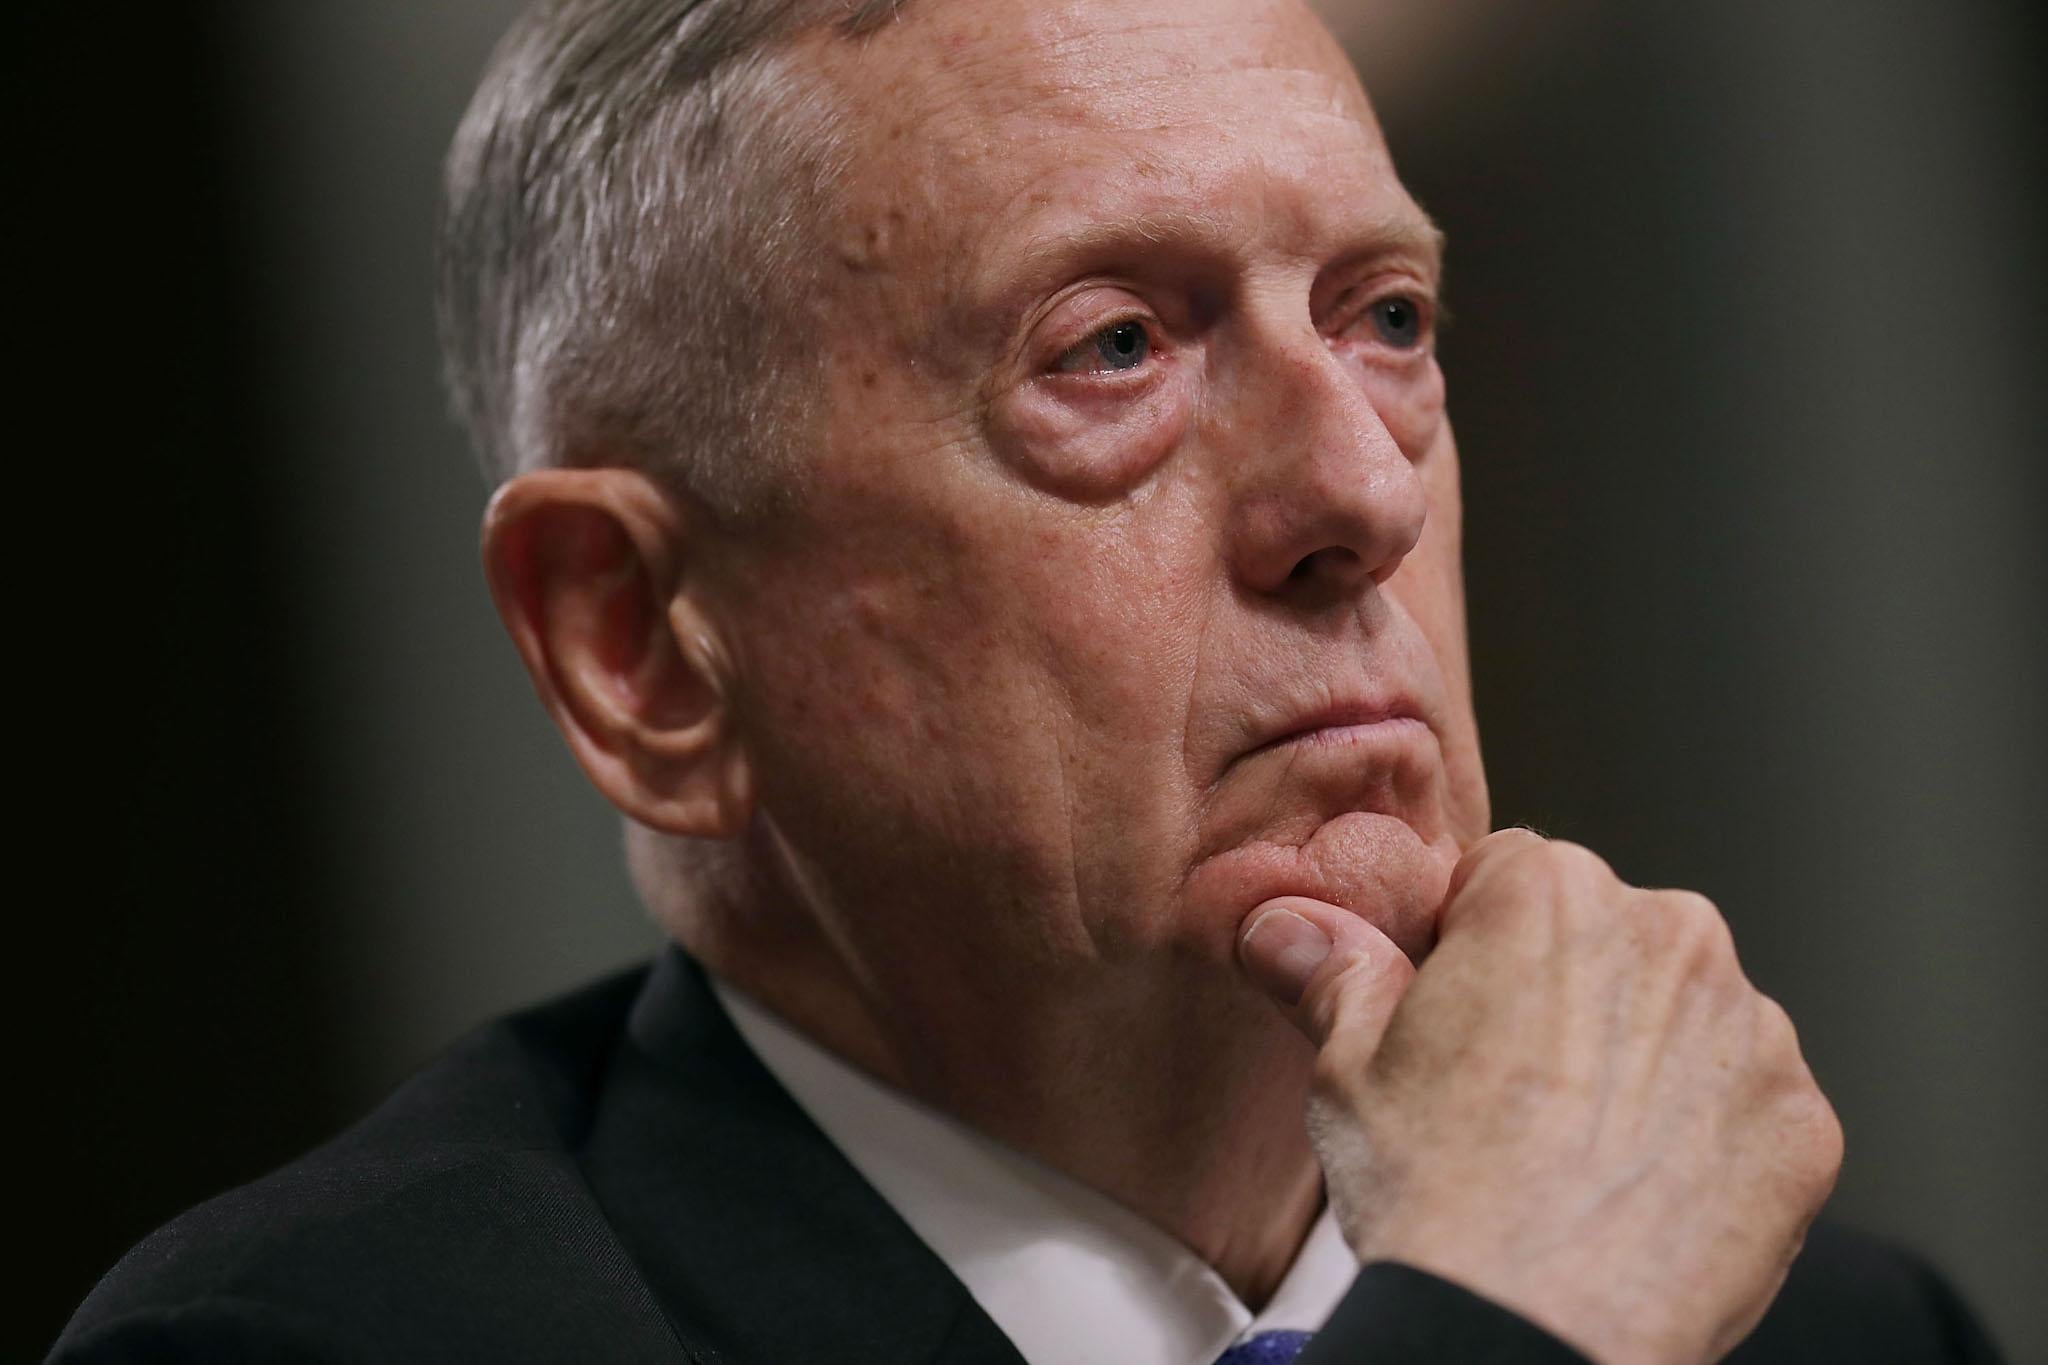 US Defence Secretary James Mattis testifies before the Senate Armed Services Committee in June